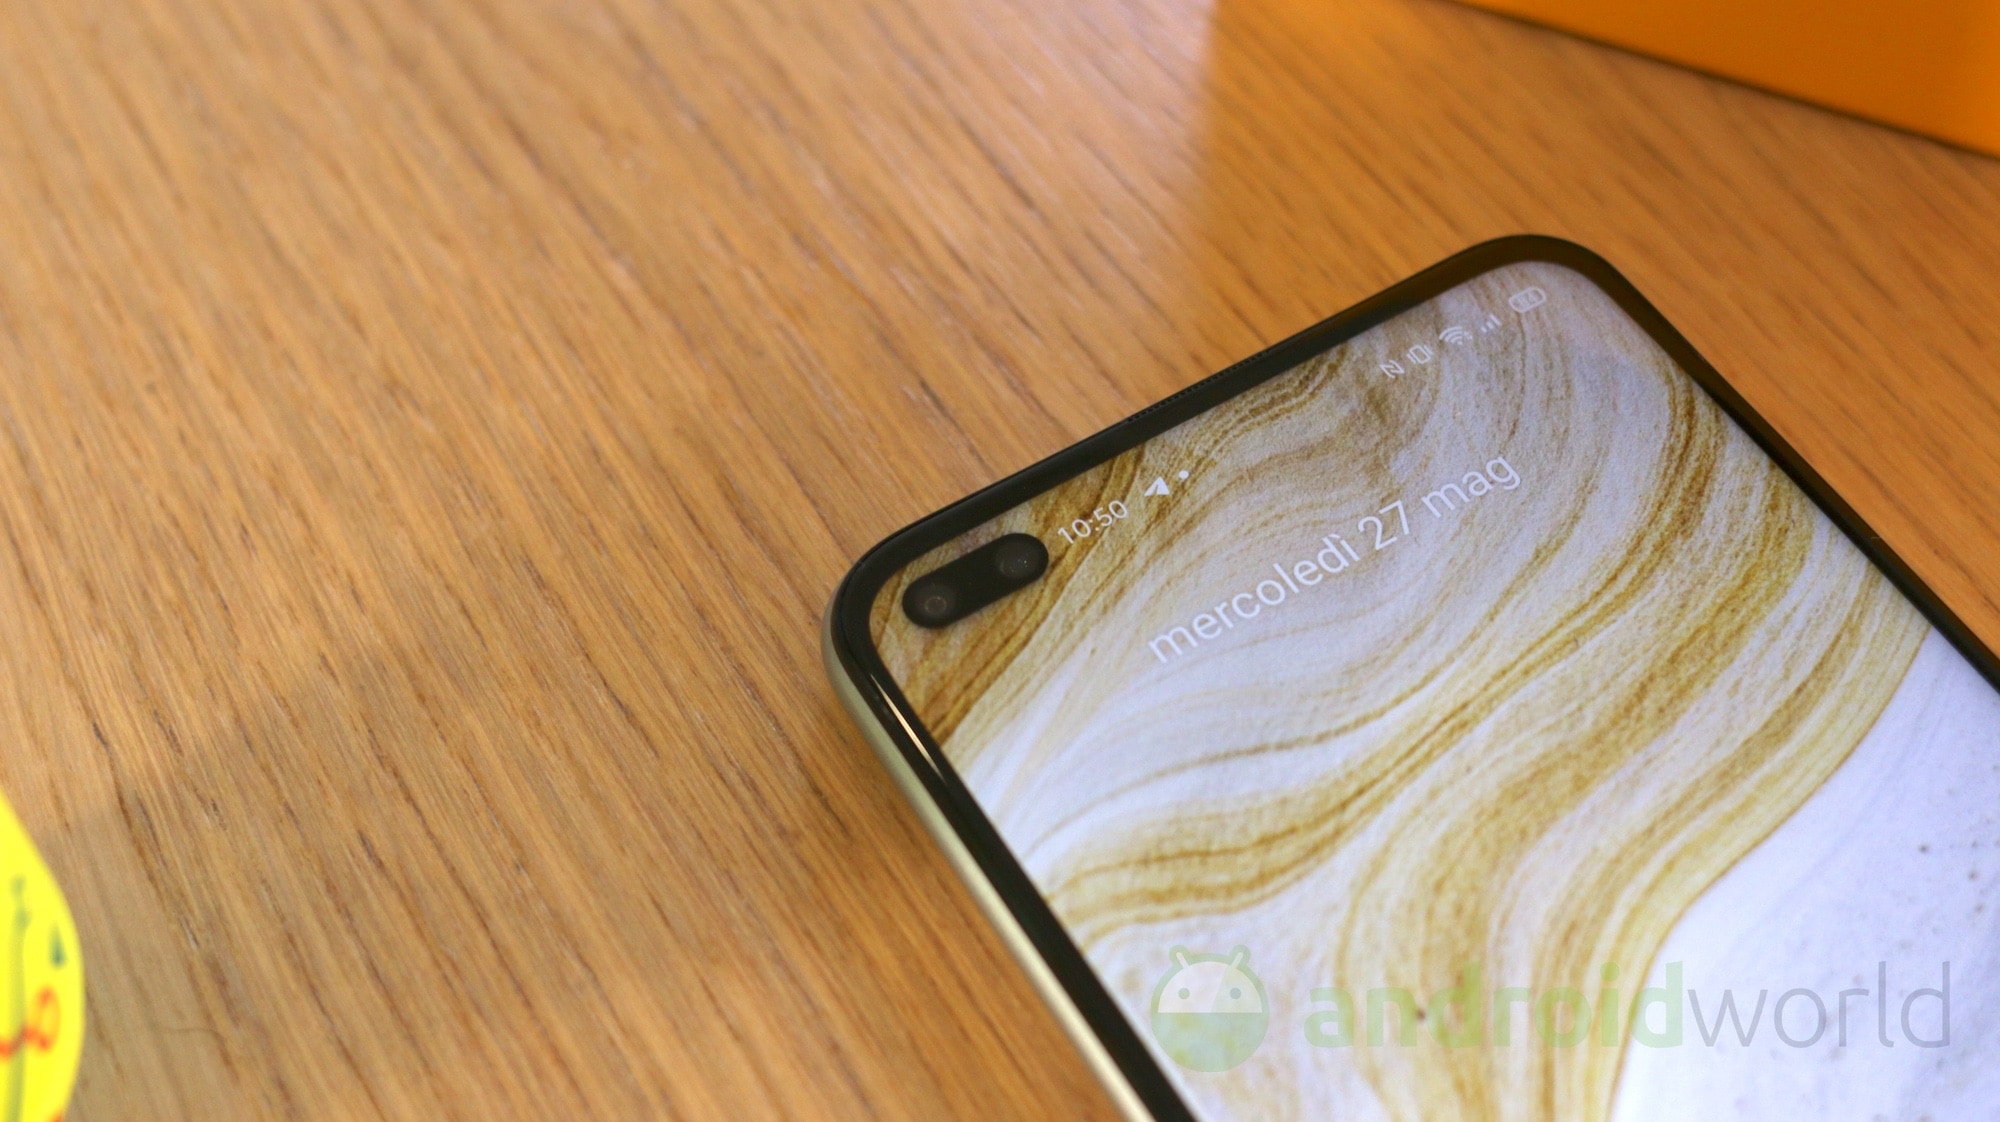 https://www.androidworld.it/wp-content/uploads/2020/05/Realme-X3-Superzoom-def-04.jpg